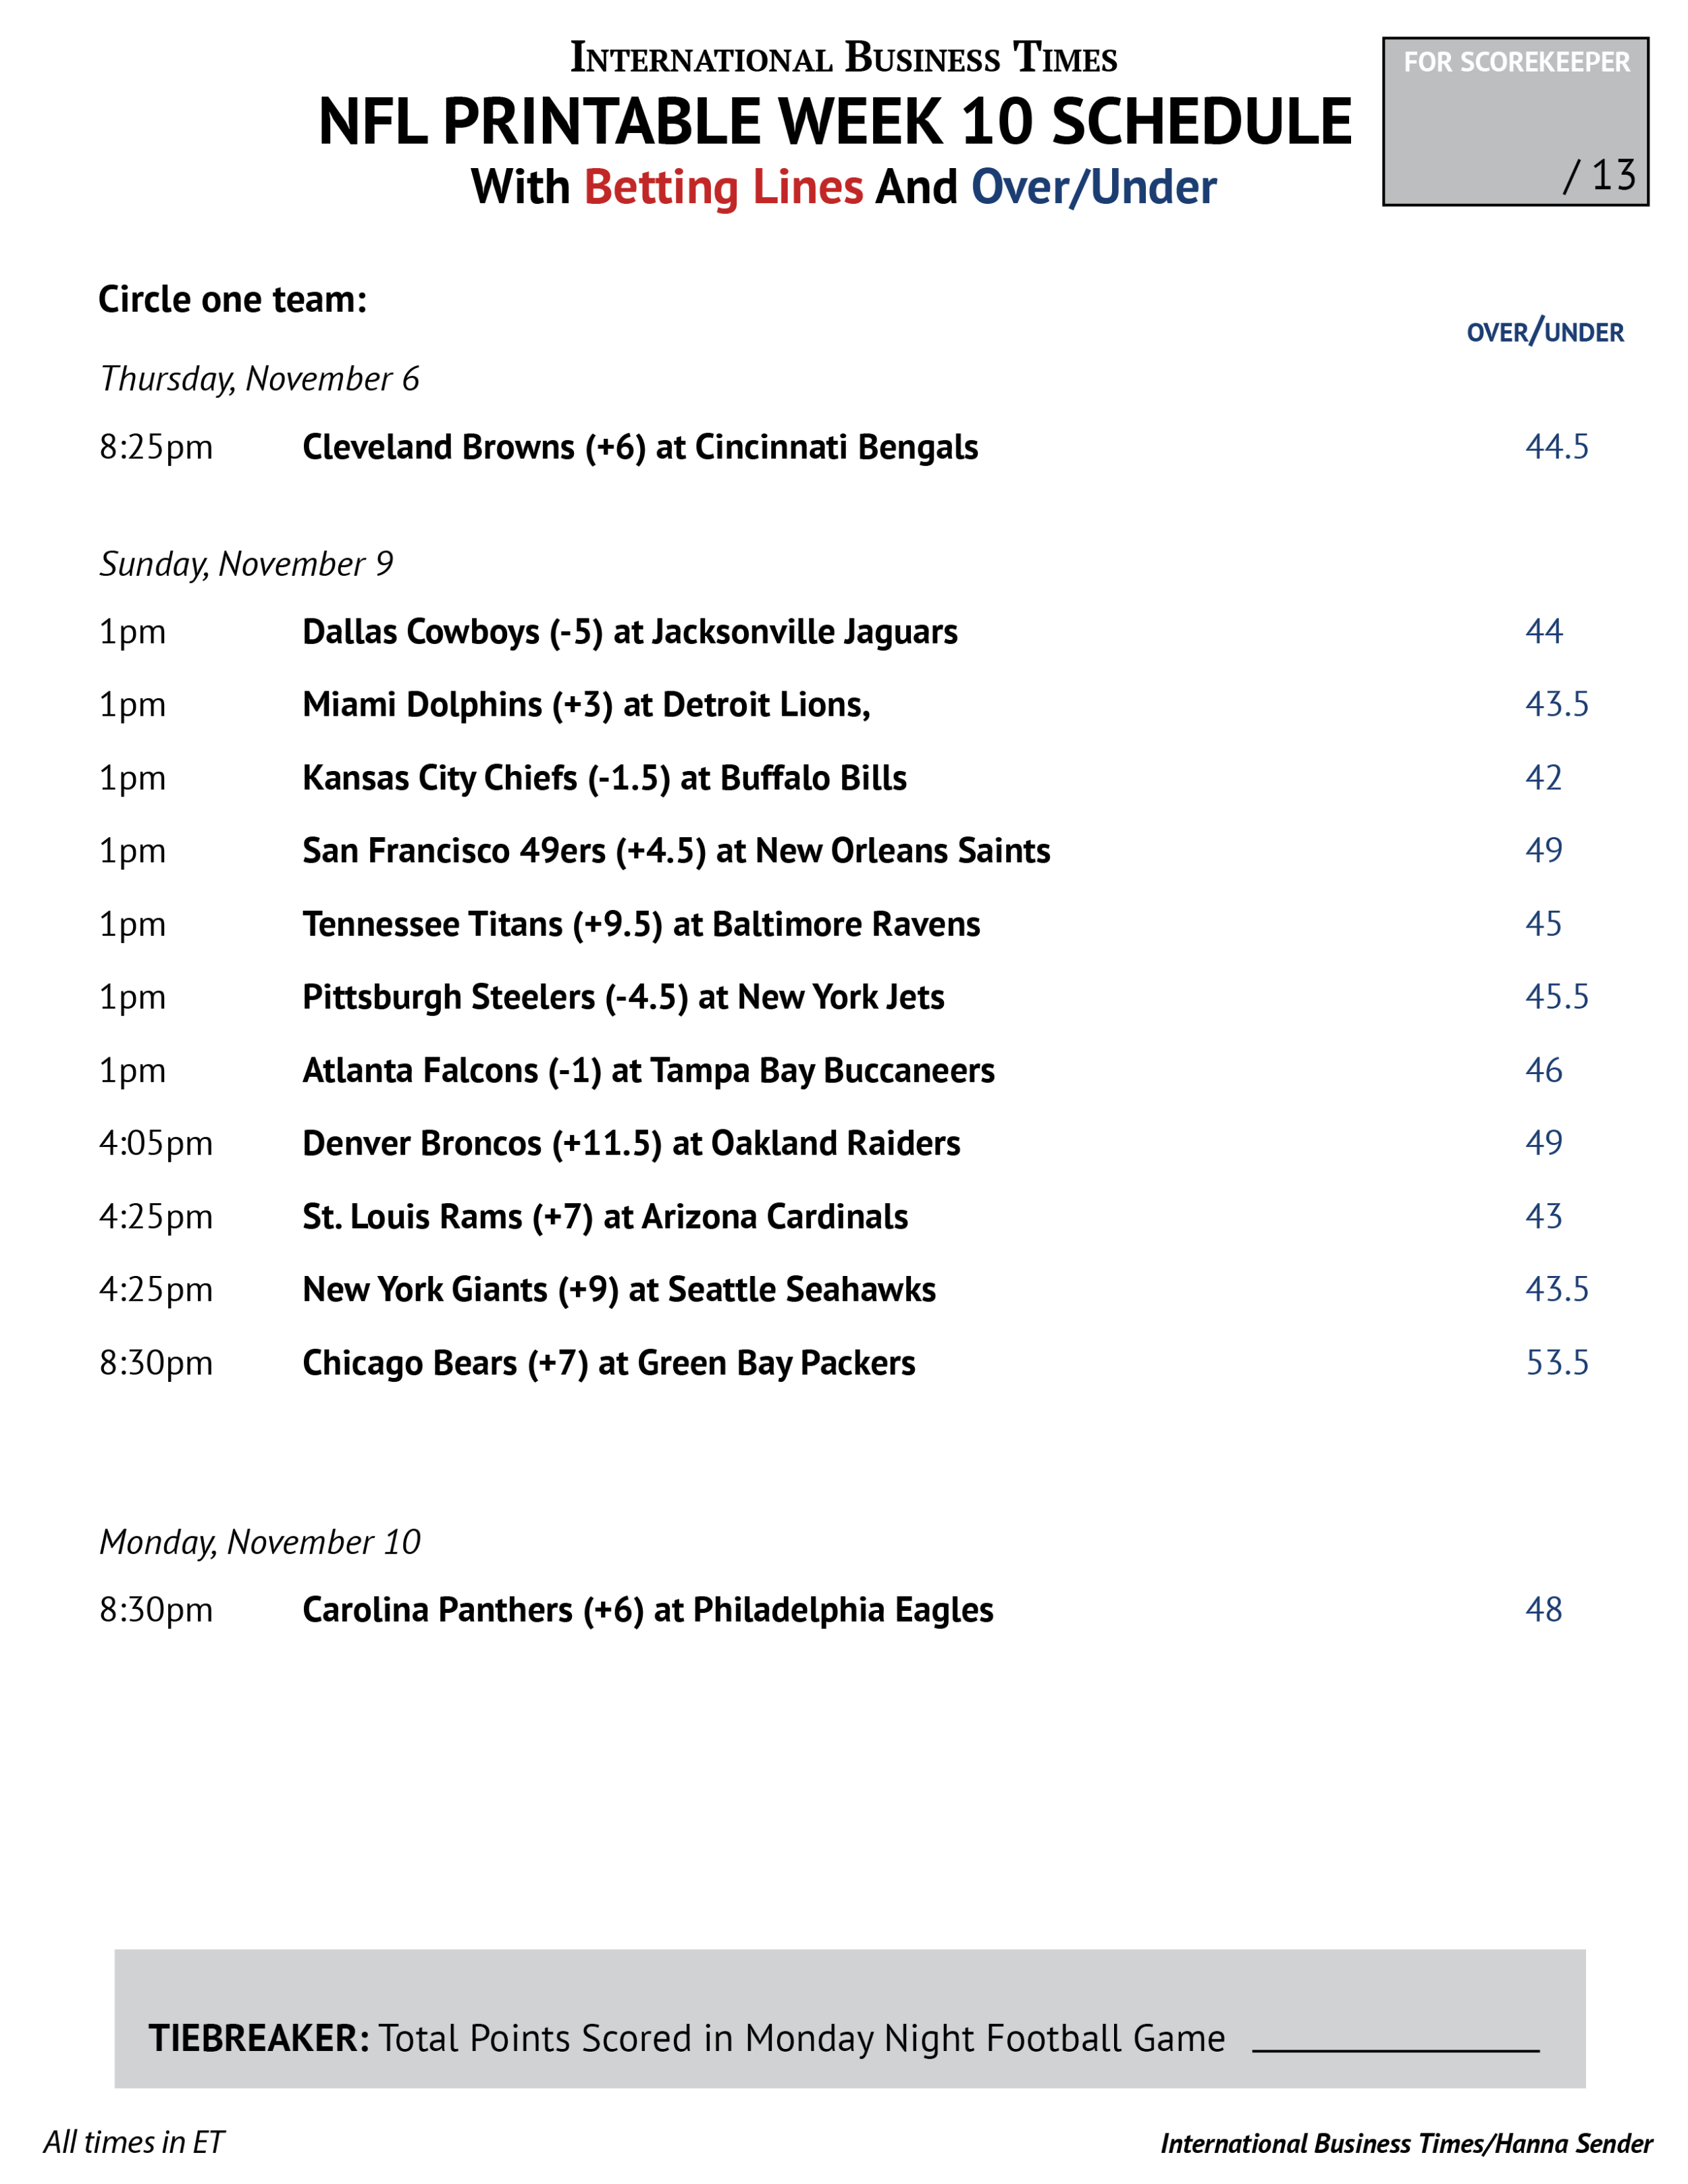 NFL Office Pool 2014 Printable Week 10 Schedule With Betting Lines And